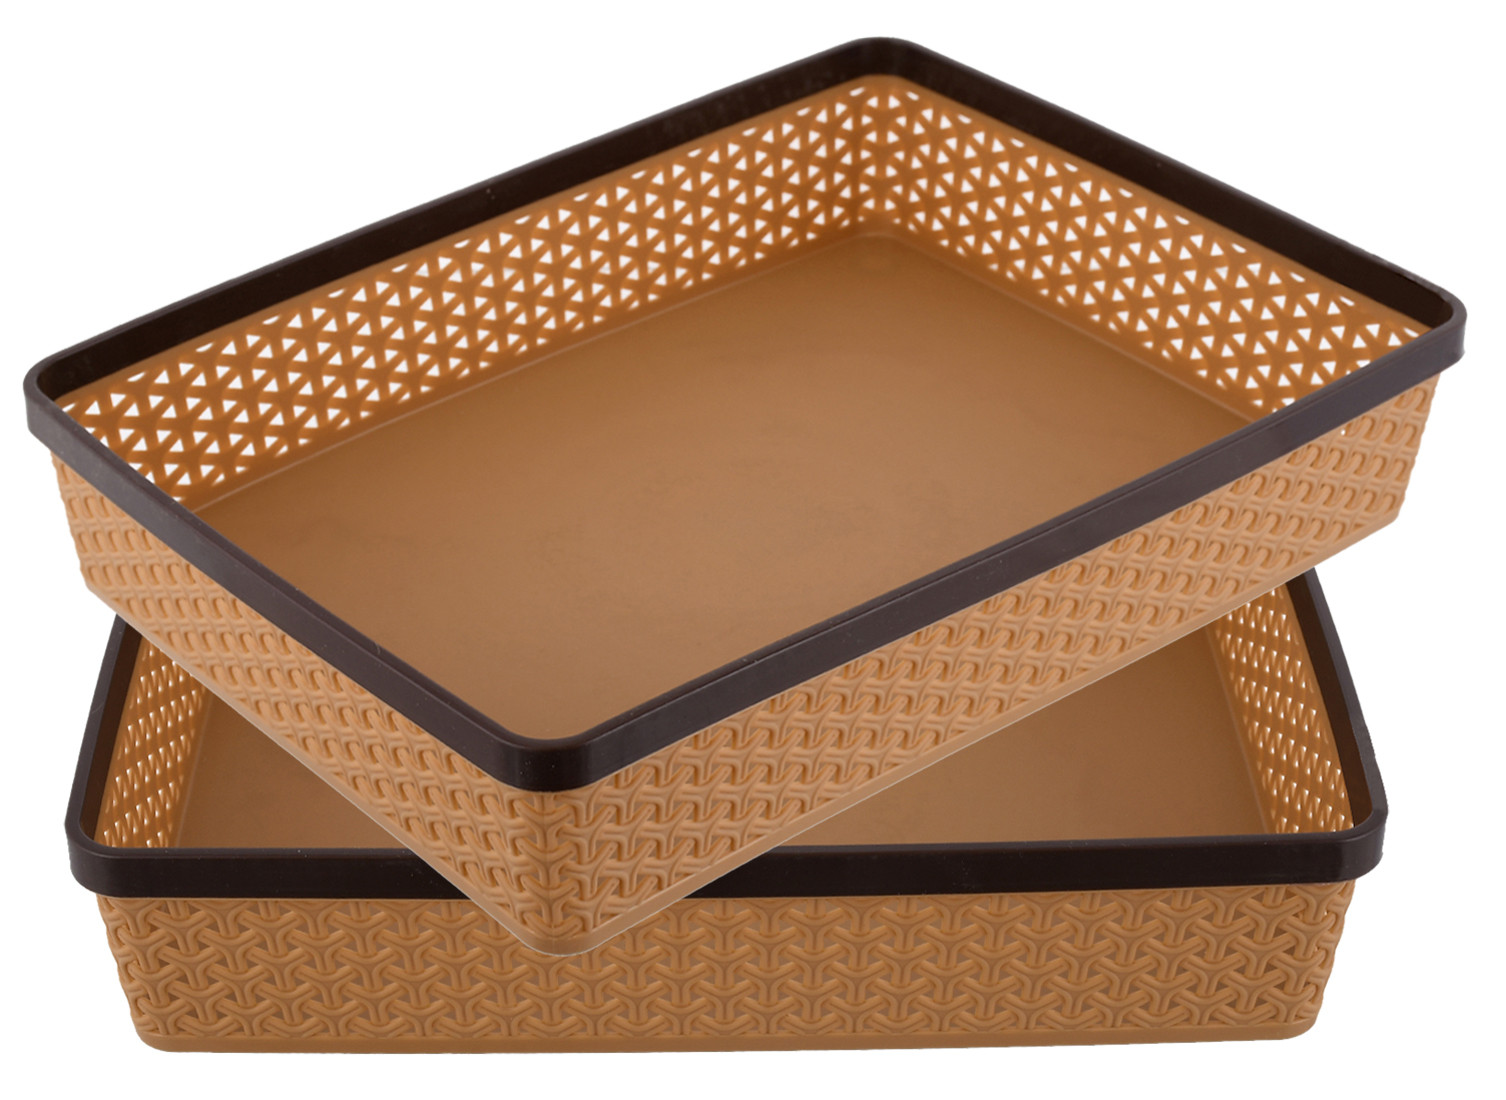 Kuber Industries Plastic Solitaire Stationary Office Tray, File Tray, Document Tray, Paper Tray A4 Documents/Papers/Letters/folders Holder Desk Organizer (Brown)